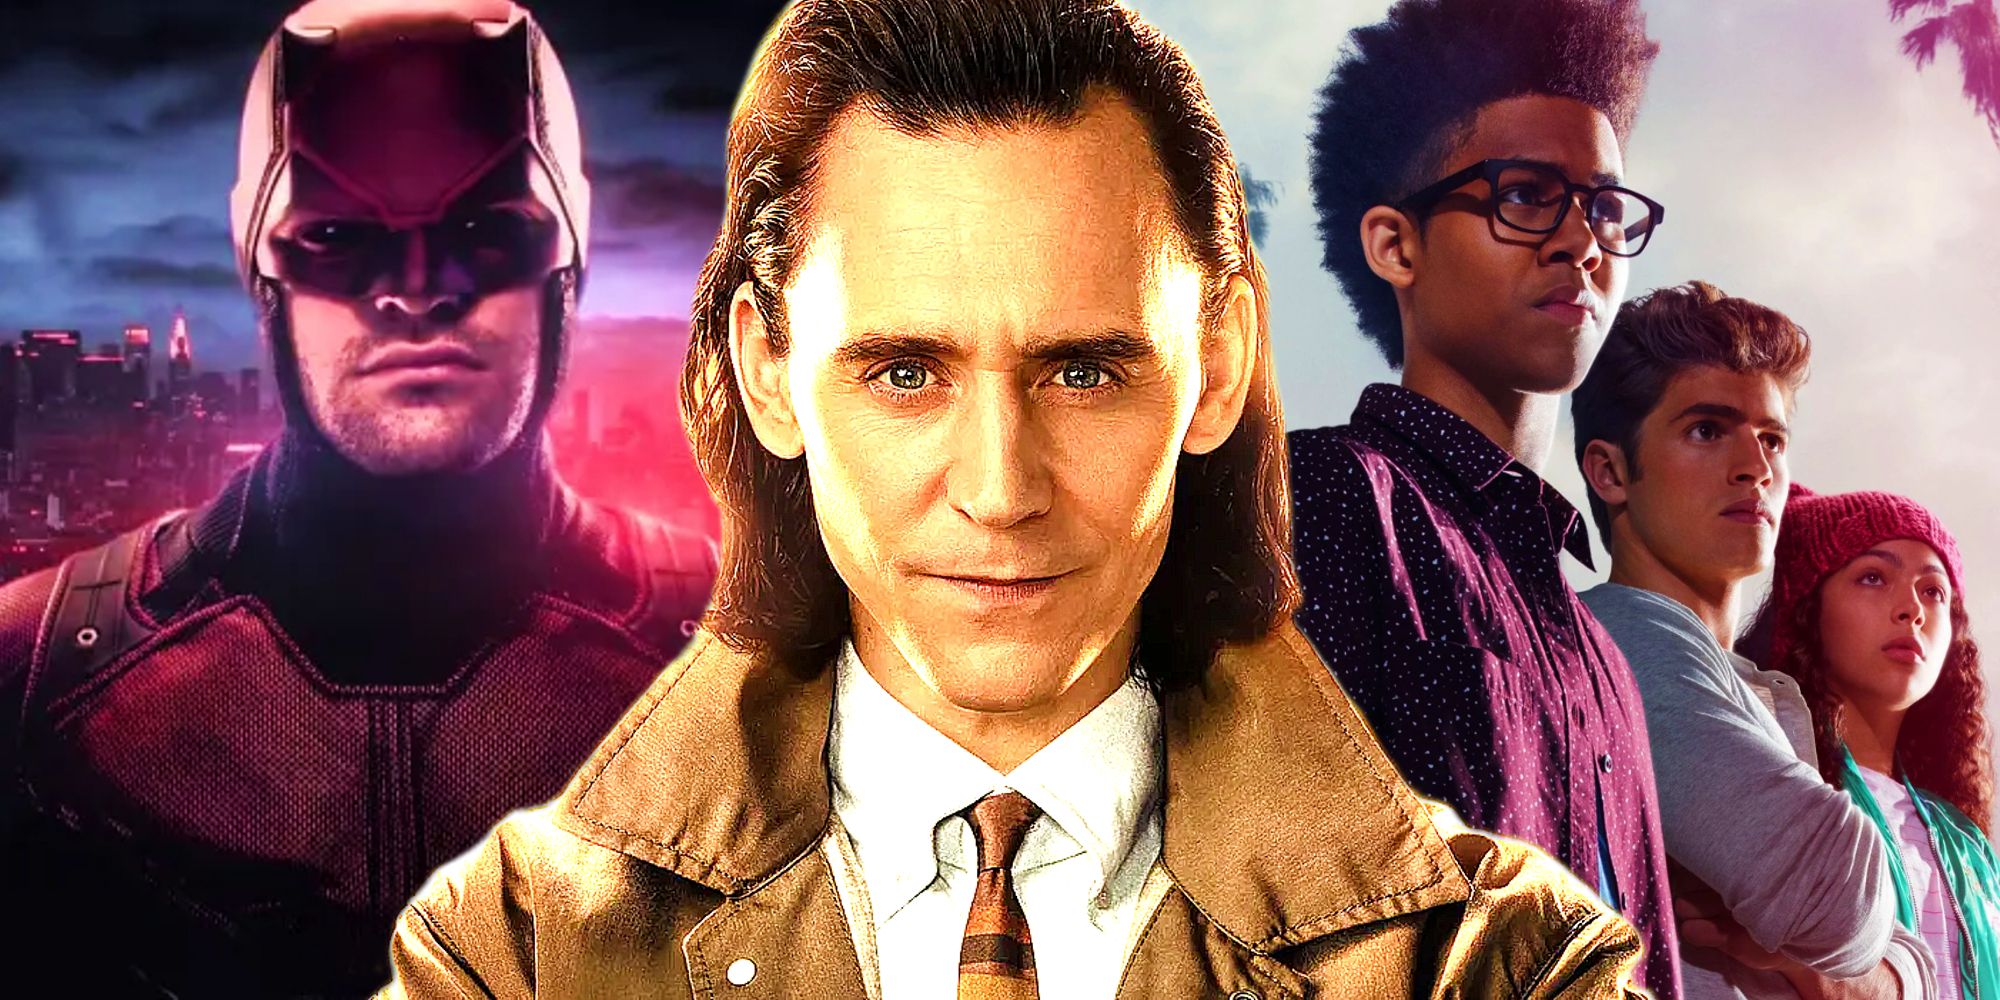 Tom Hiddleston as Loki in the show's poster between Netflix's Daredevil and the poster for Marvel Runaways